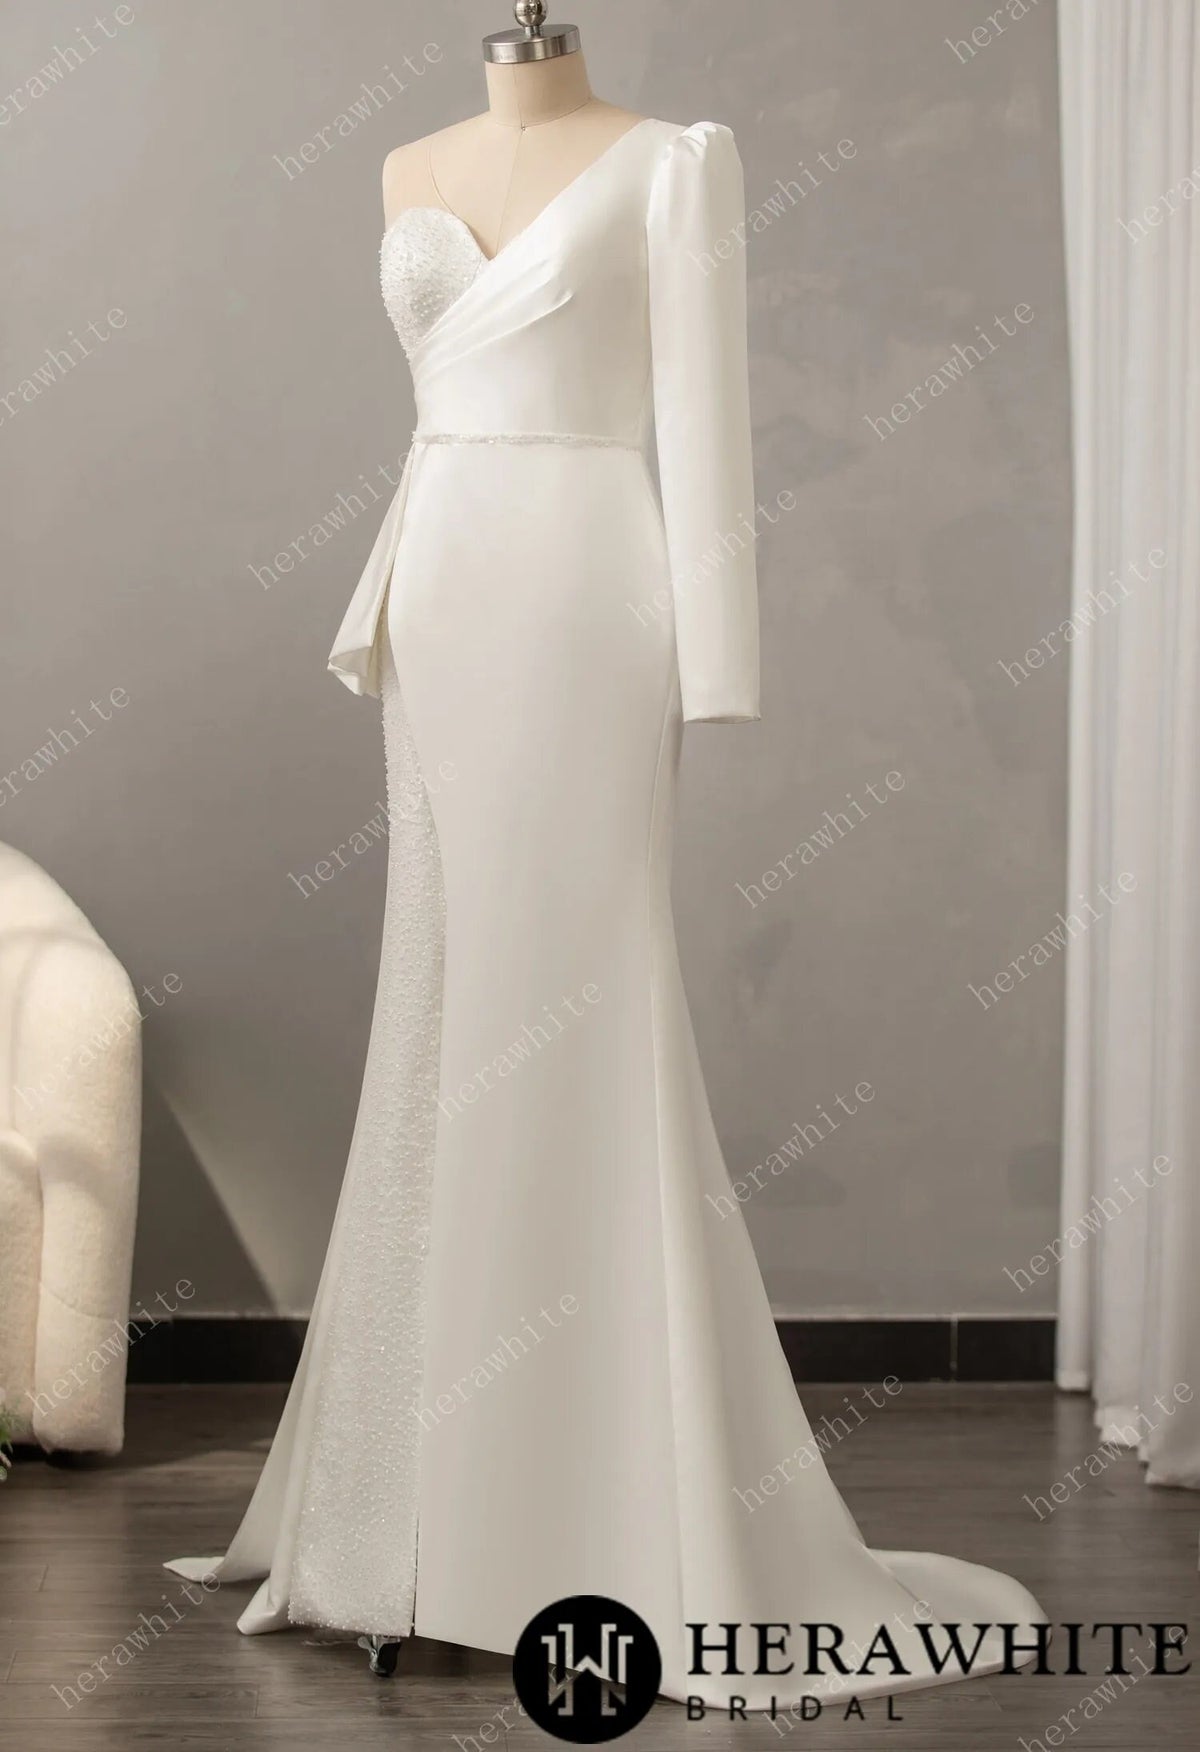 Modern Dress Soft Satin Fabric, Long Sleeve, One Shoulder, Wedding Dress Bridal Gown Sweetheart Neckline Beaded Illusion Back Fit and Flare